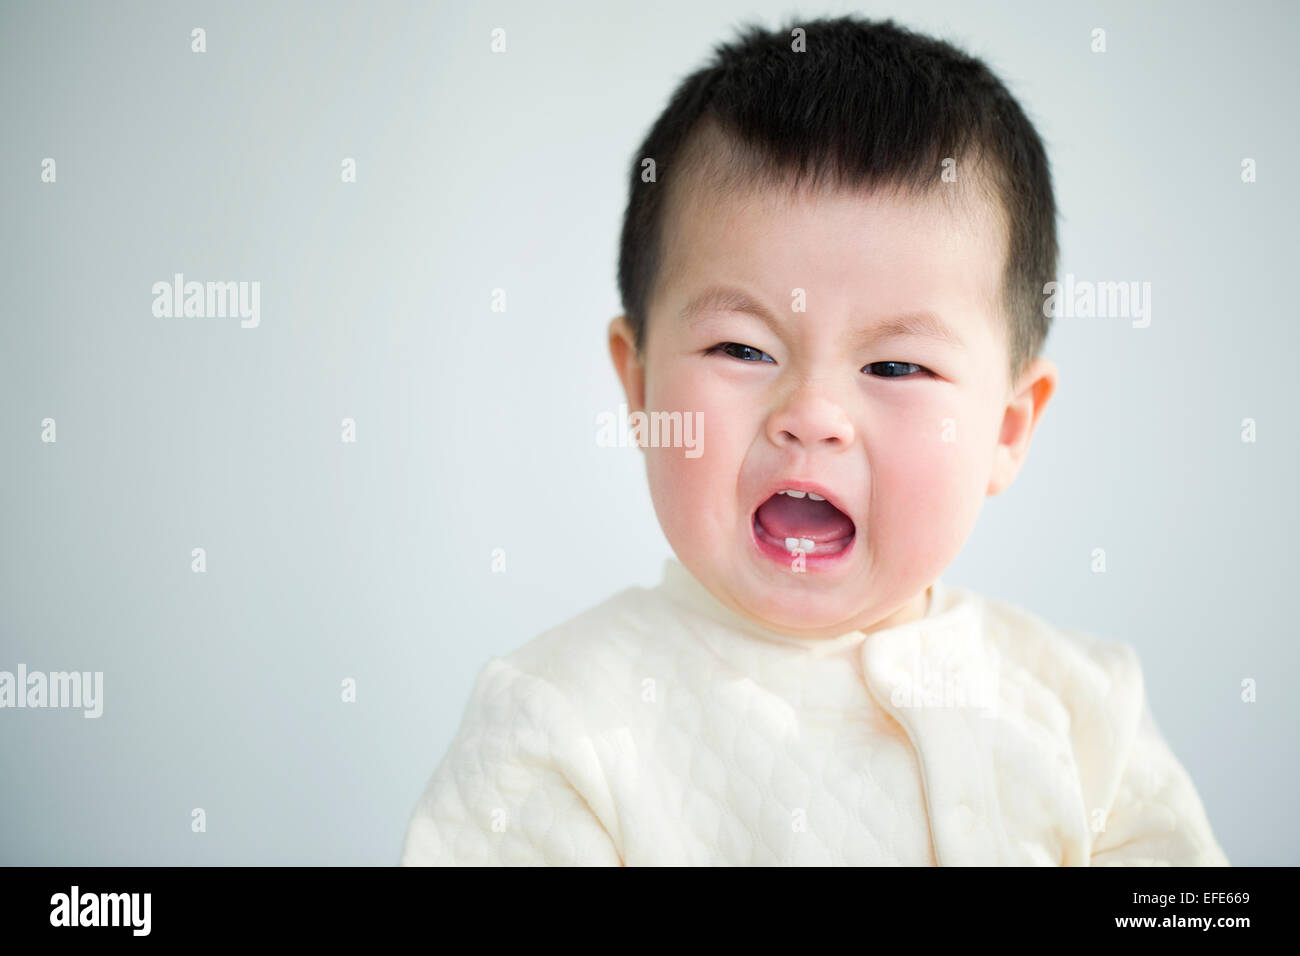 Cute baby crying Stock Photo